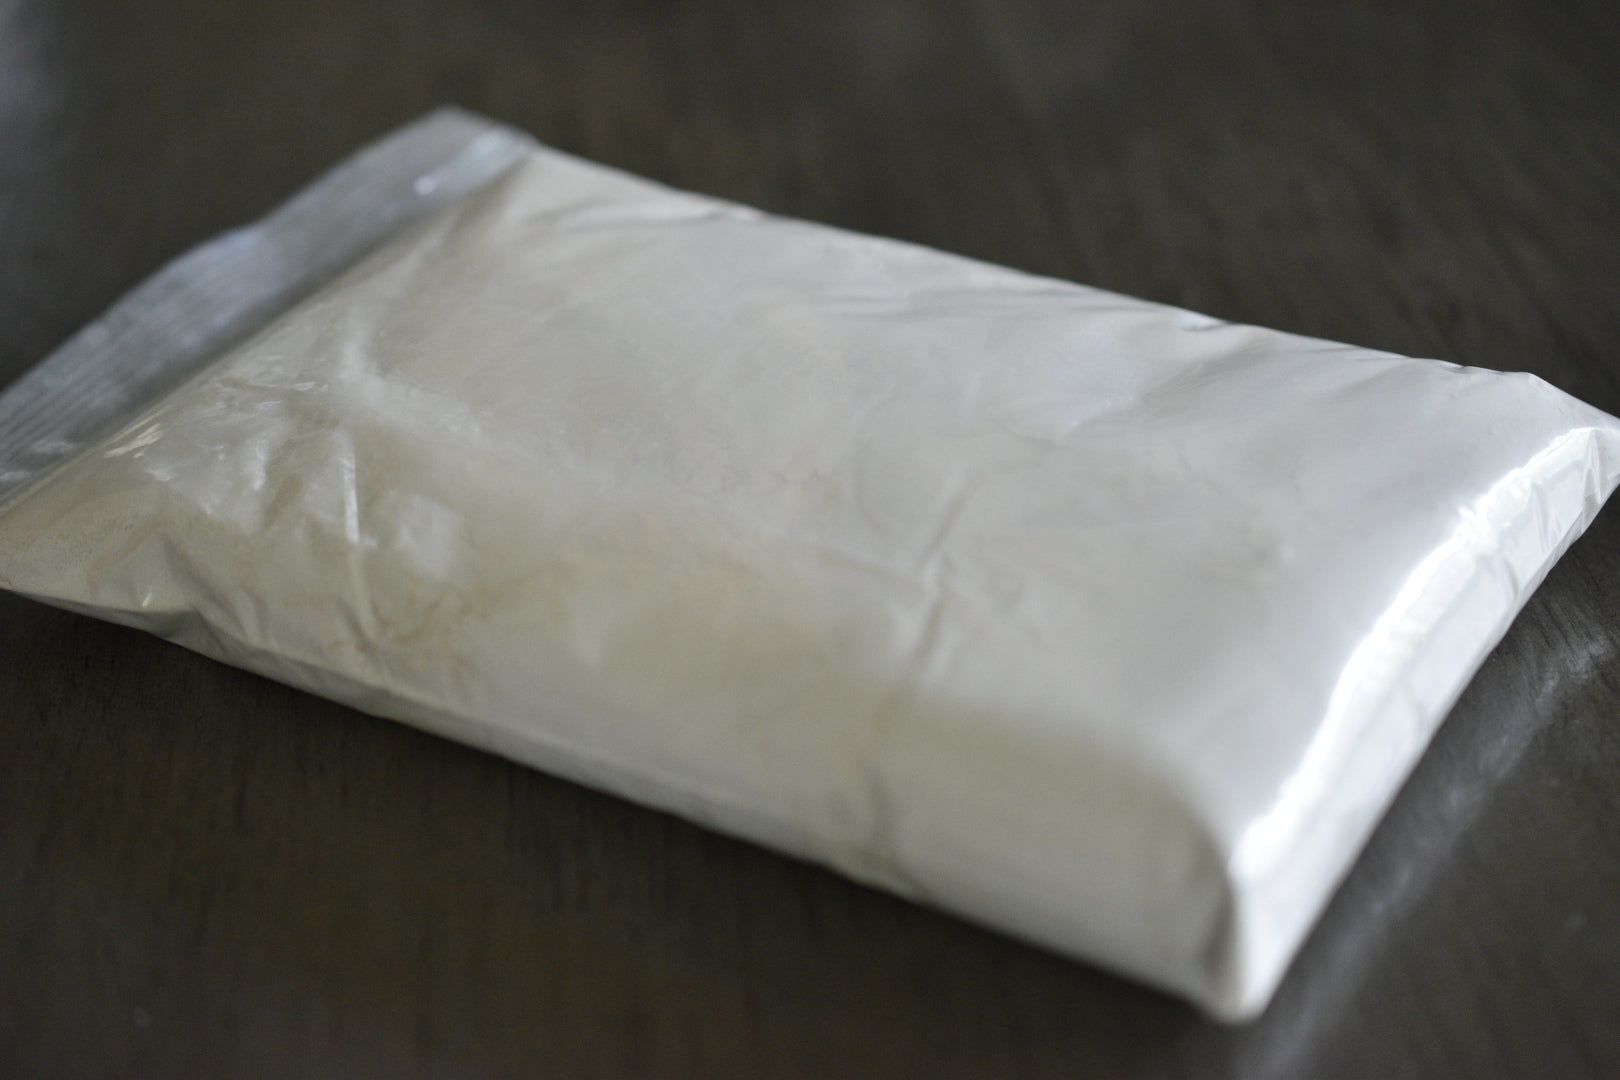 A plastic bag filled with kaolin clay rests on a wooden surface to show the packaged product. The clay is grey.